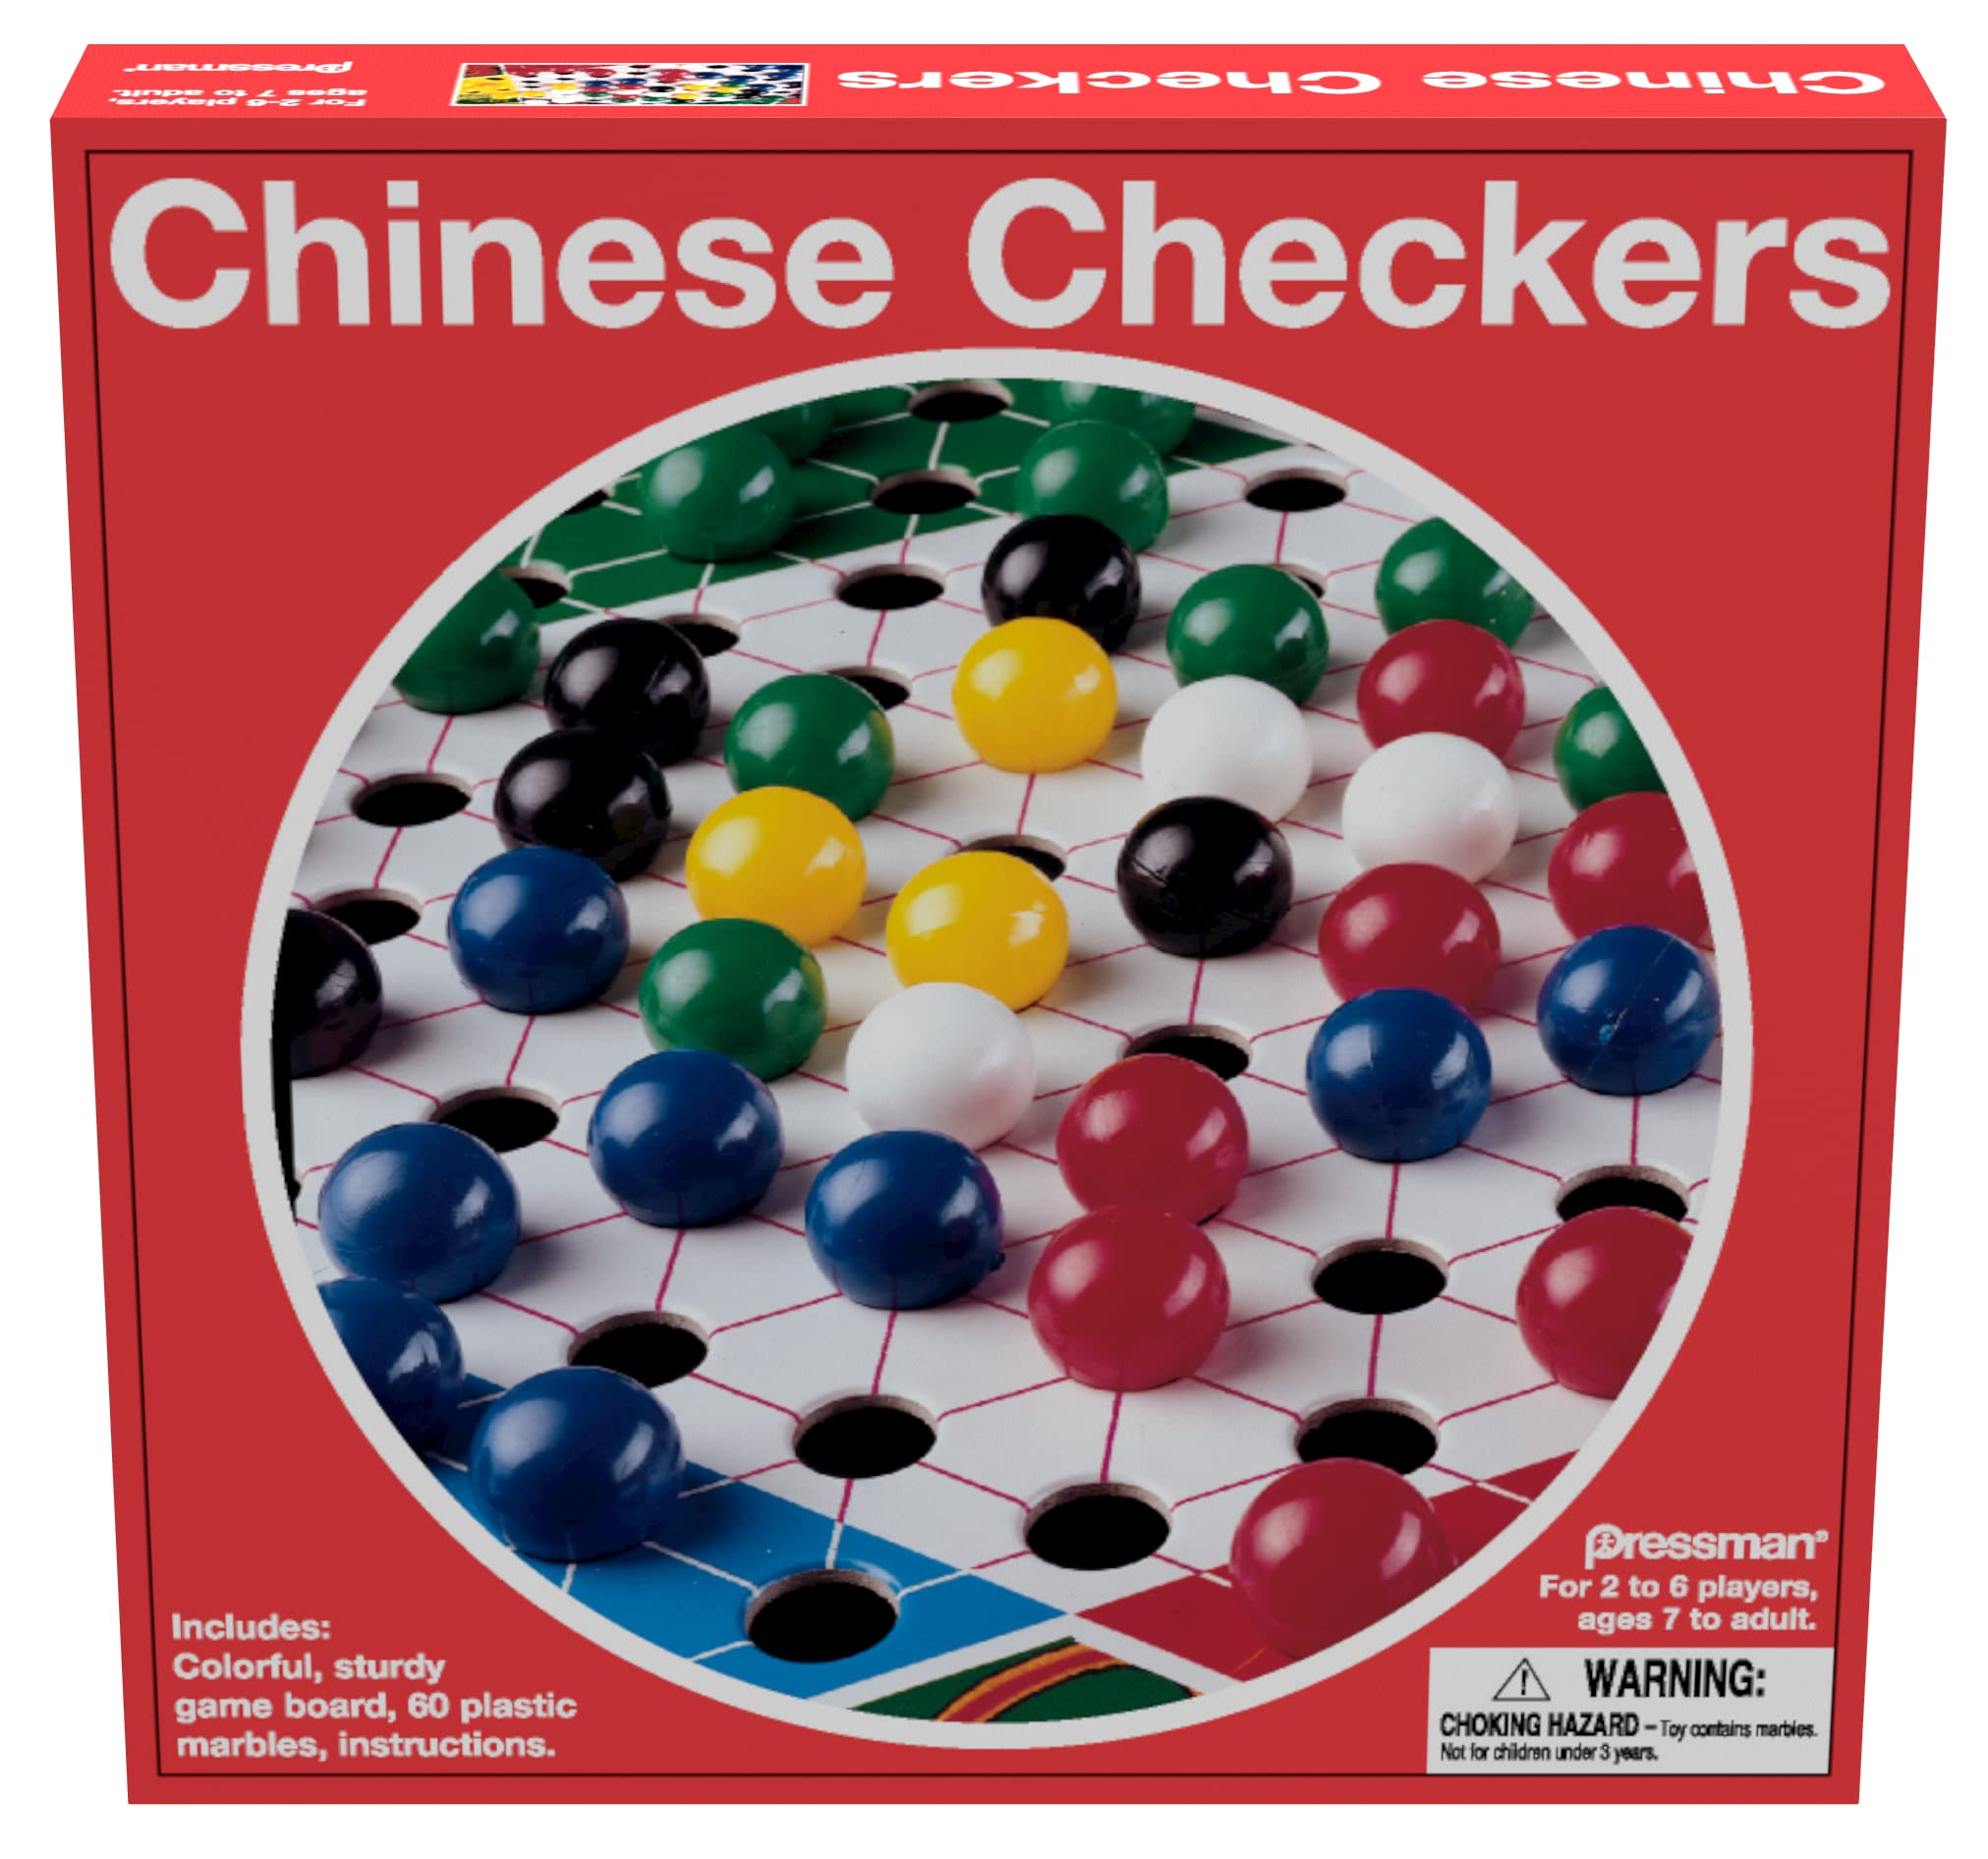 Chinese Checkers - Classic Game of Strategy for 2-6 Players by Pressman